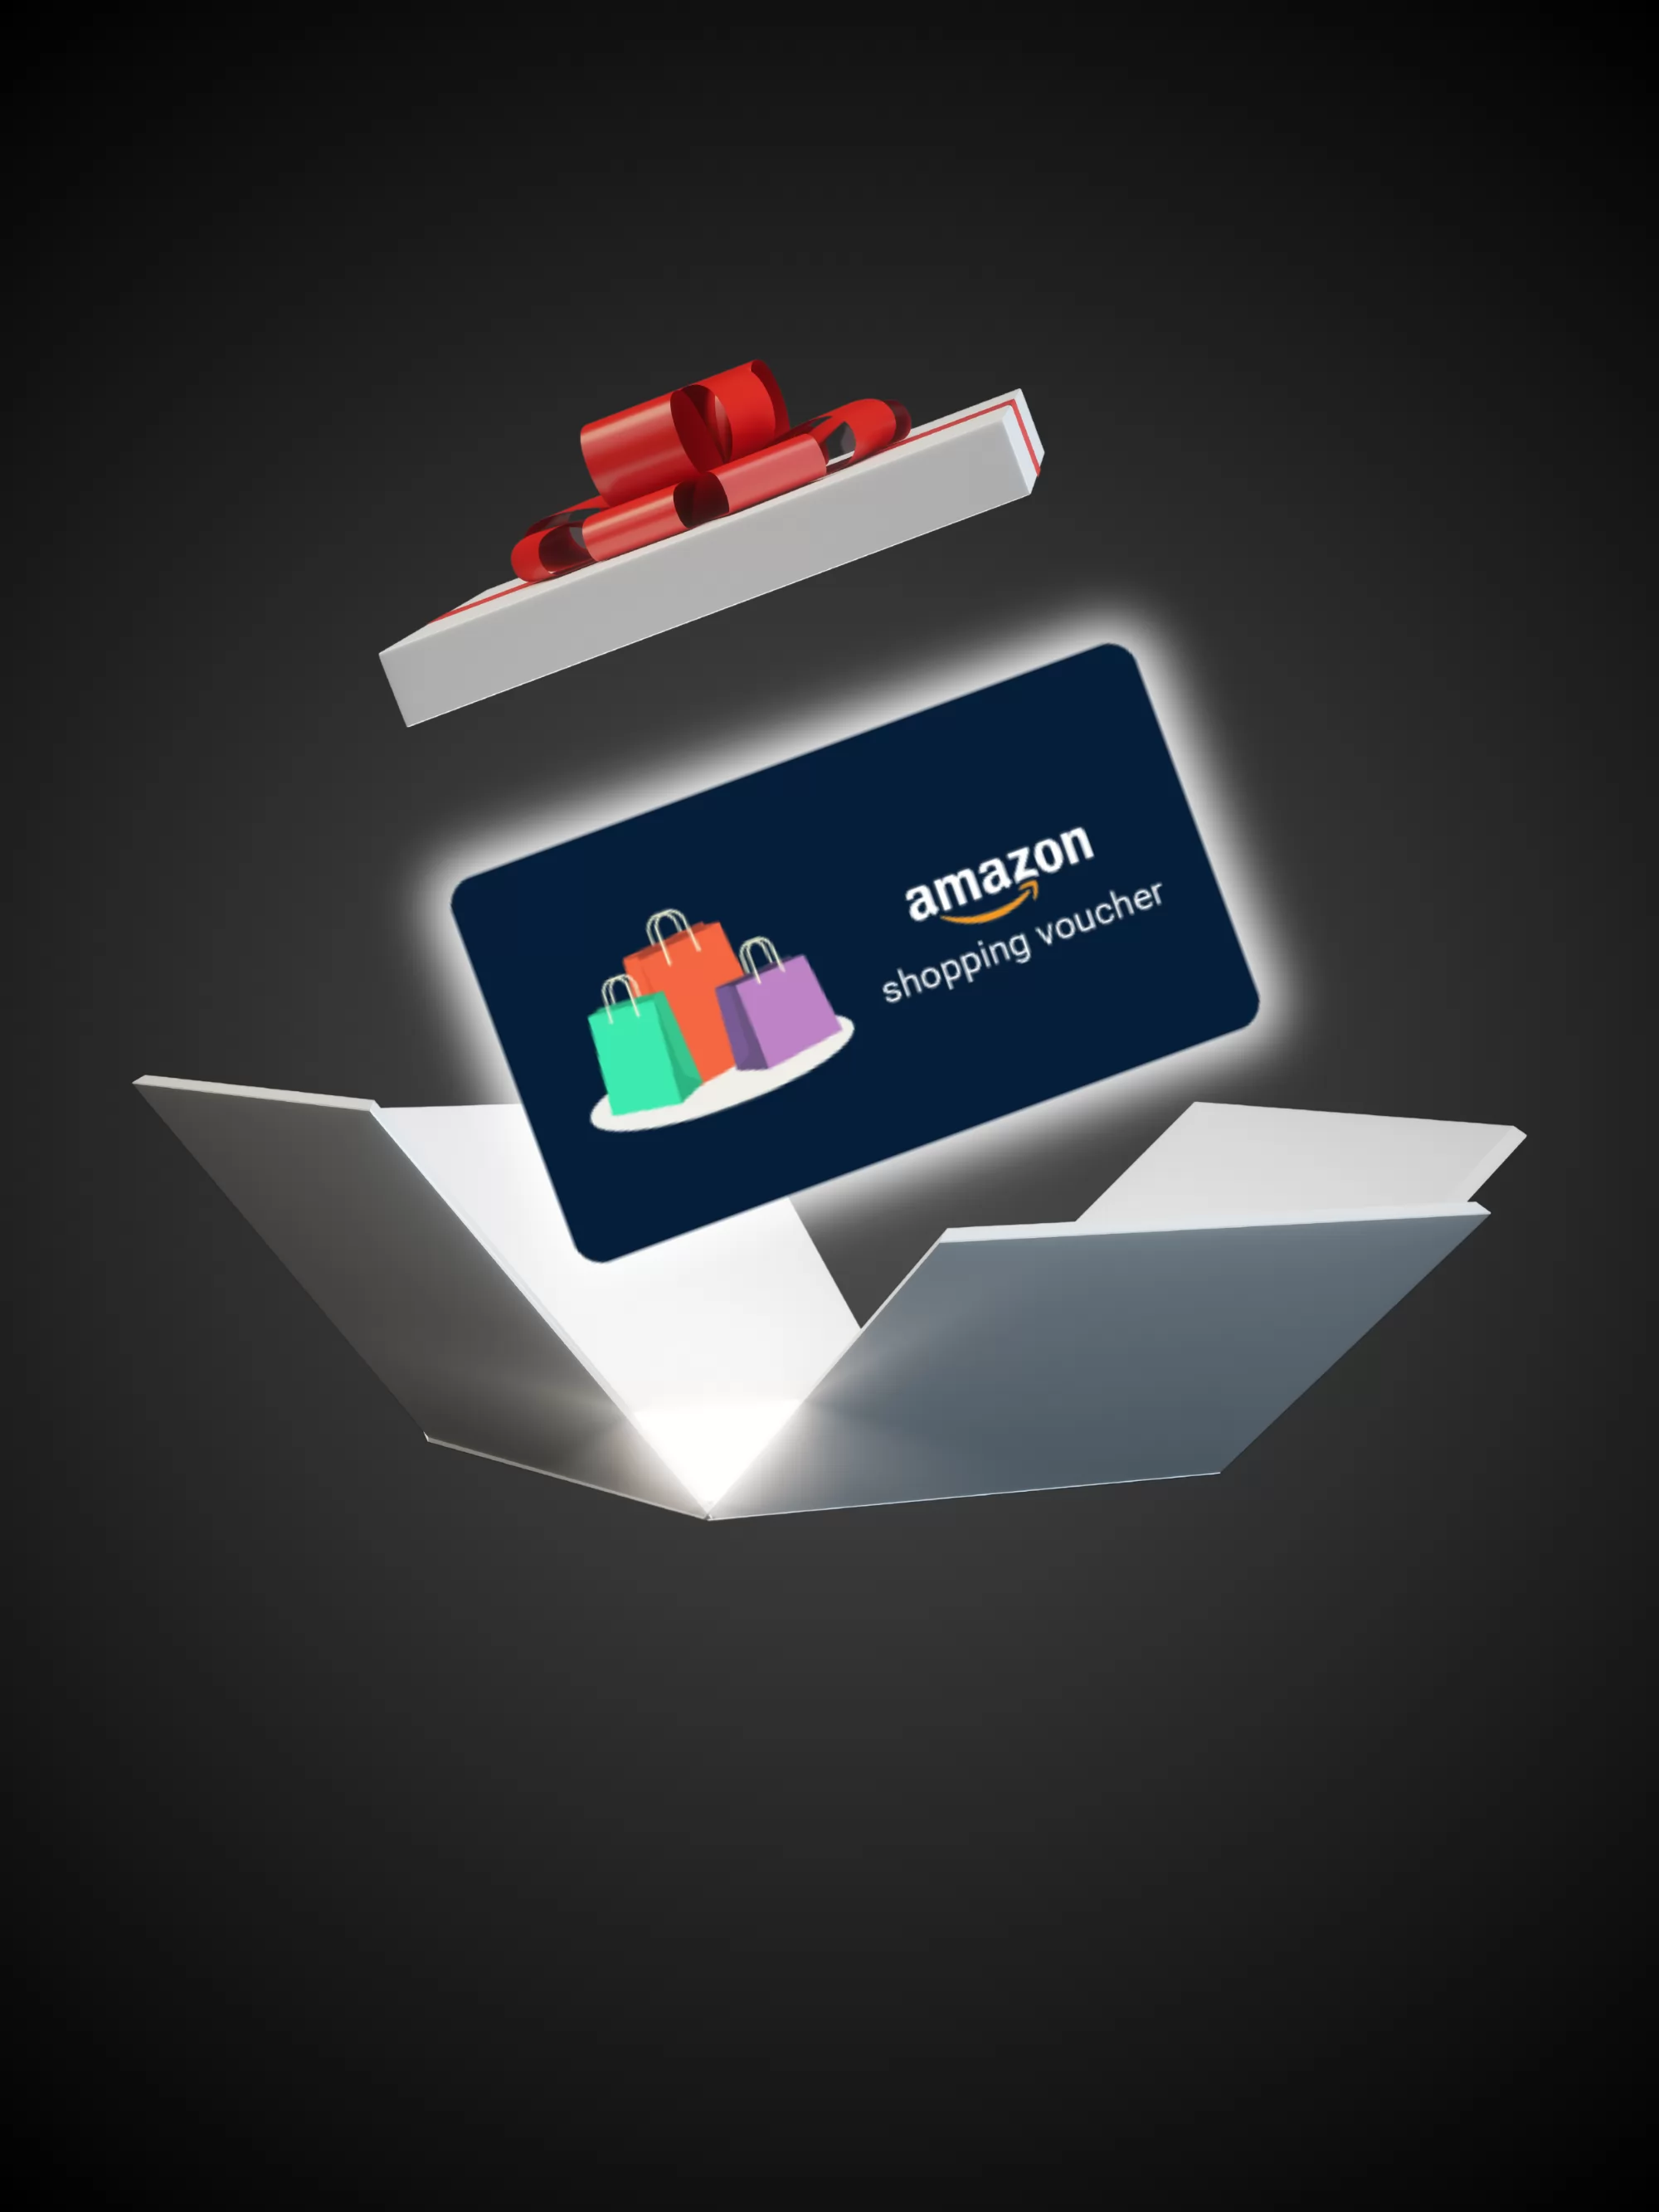 This Free Rs.300 Amazon Voucher Is Yours